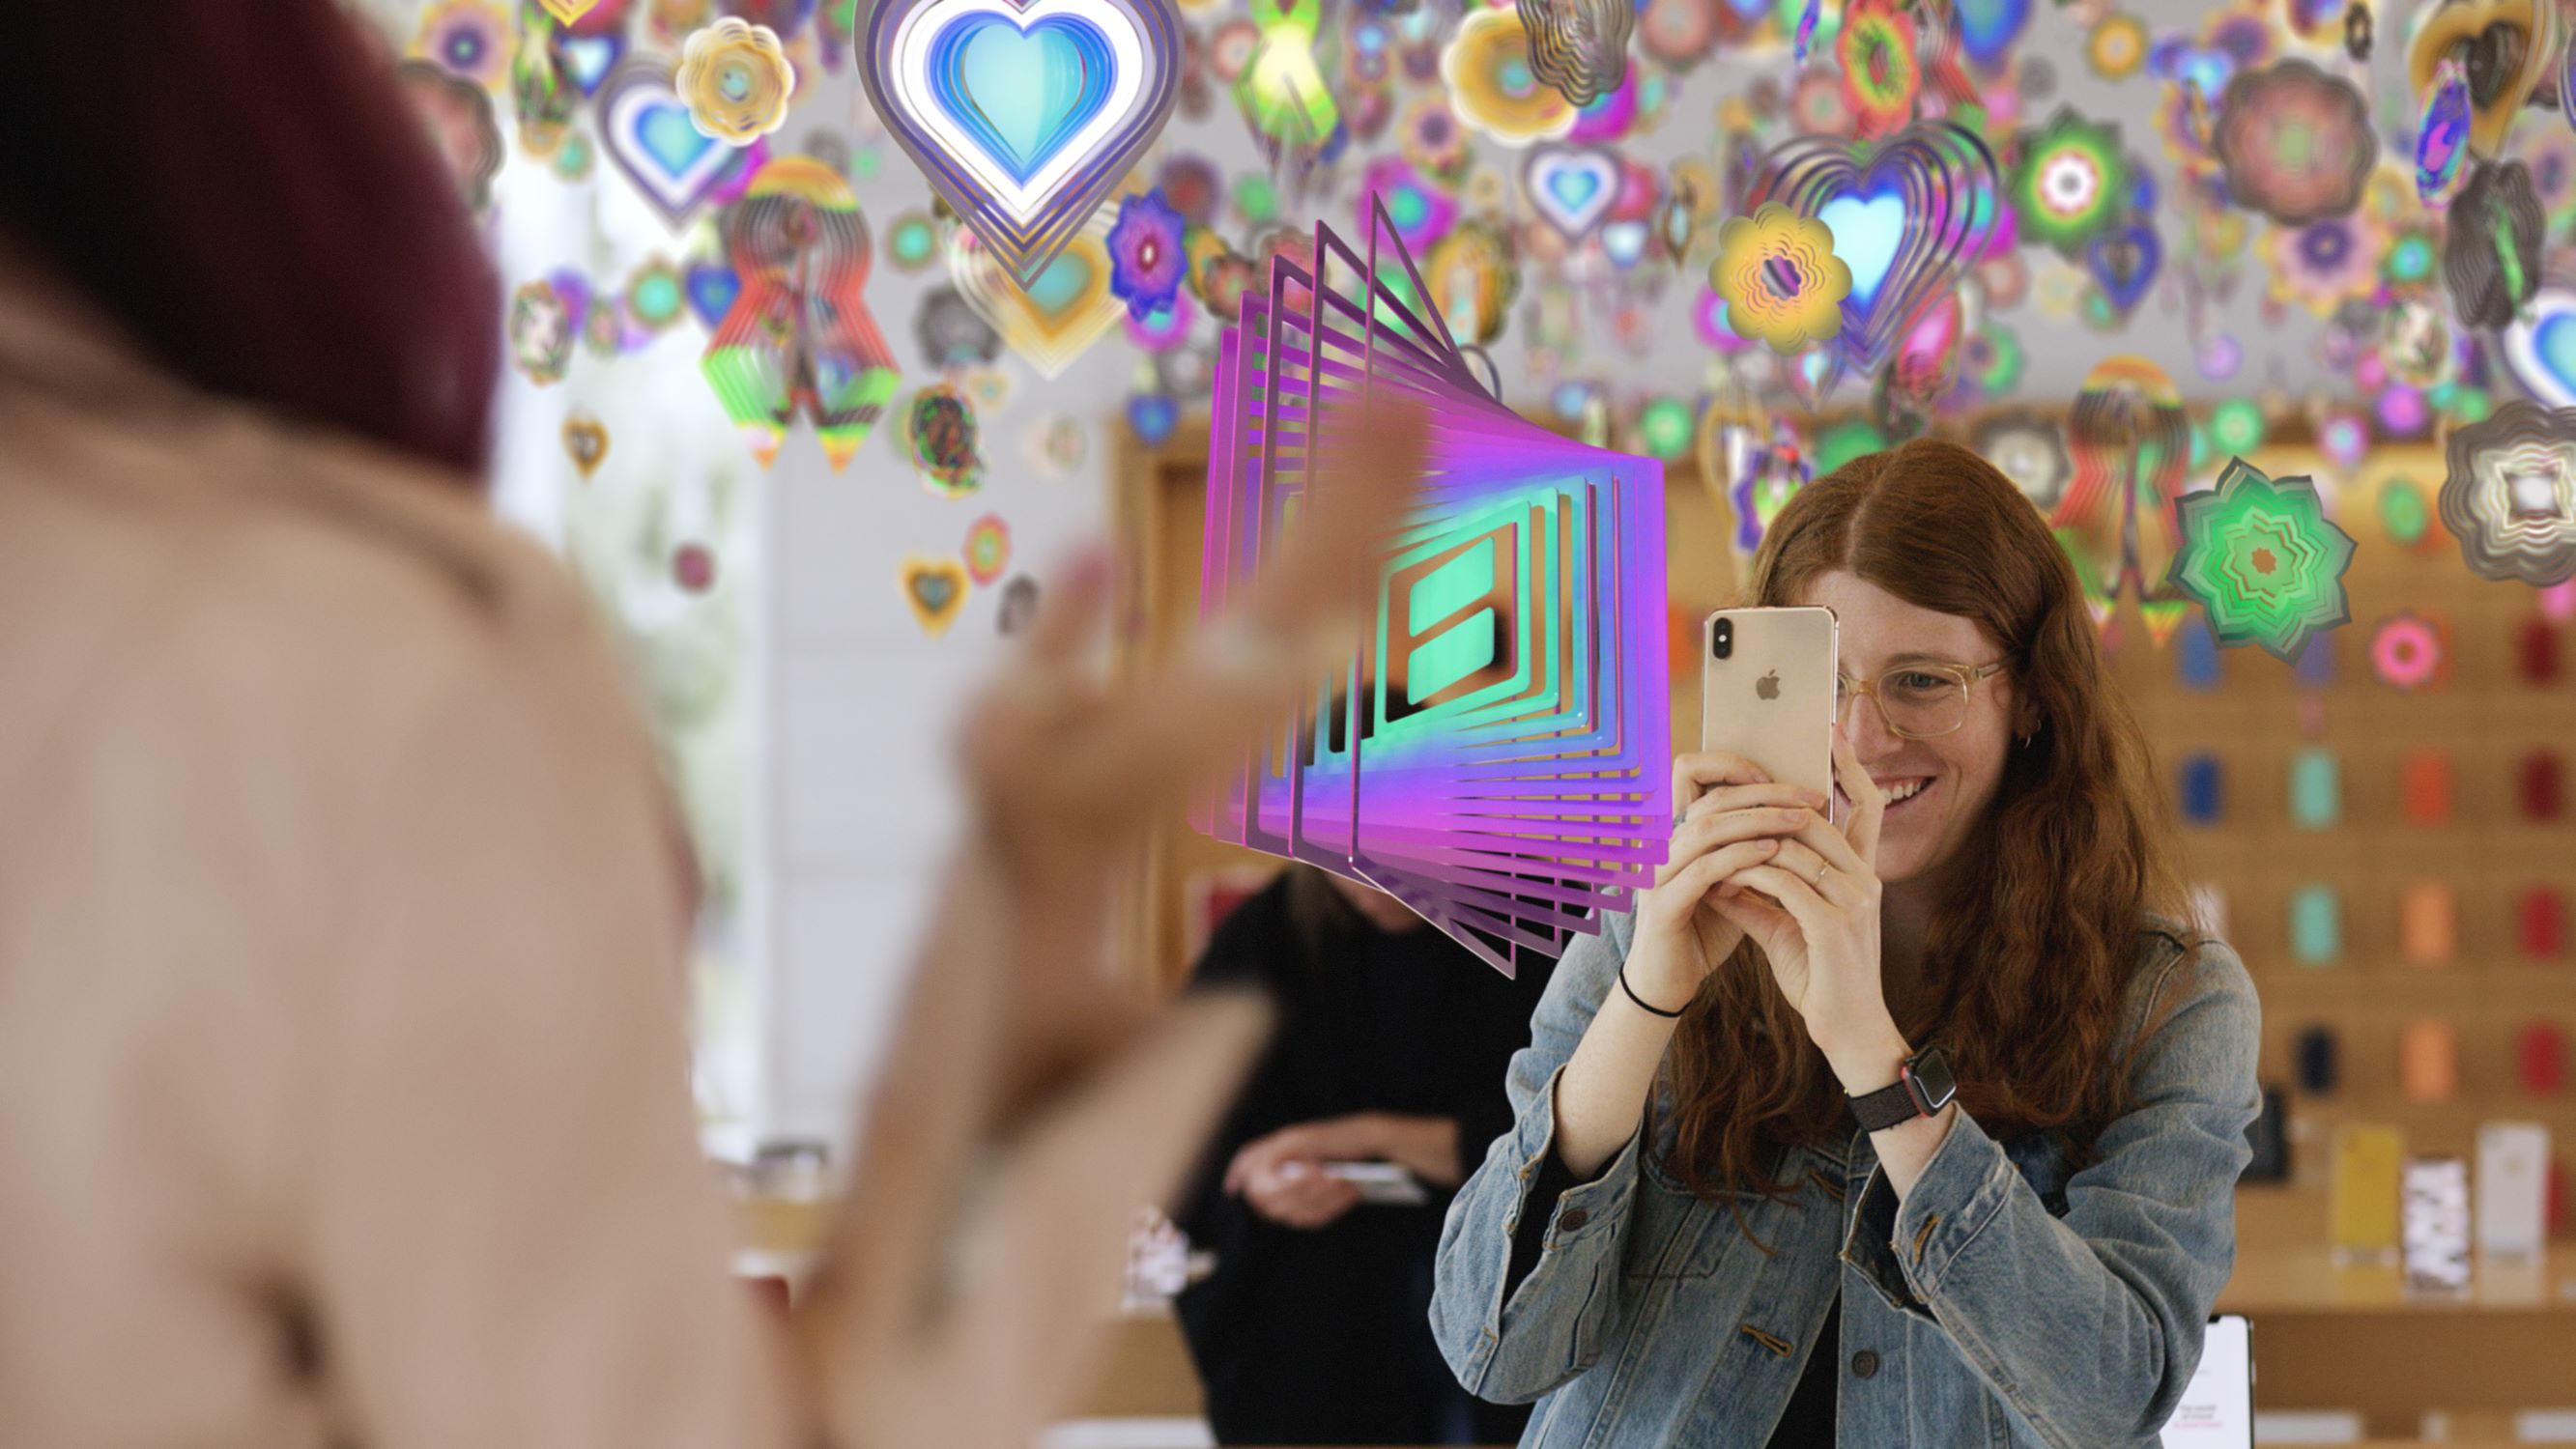 Every Apple Store worldwide offers the chance to experience Nick Cave’s “Amass,” an interactive installation. Image courtesy of Apple and the artist